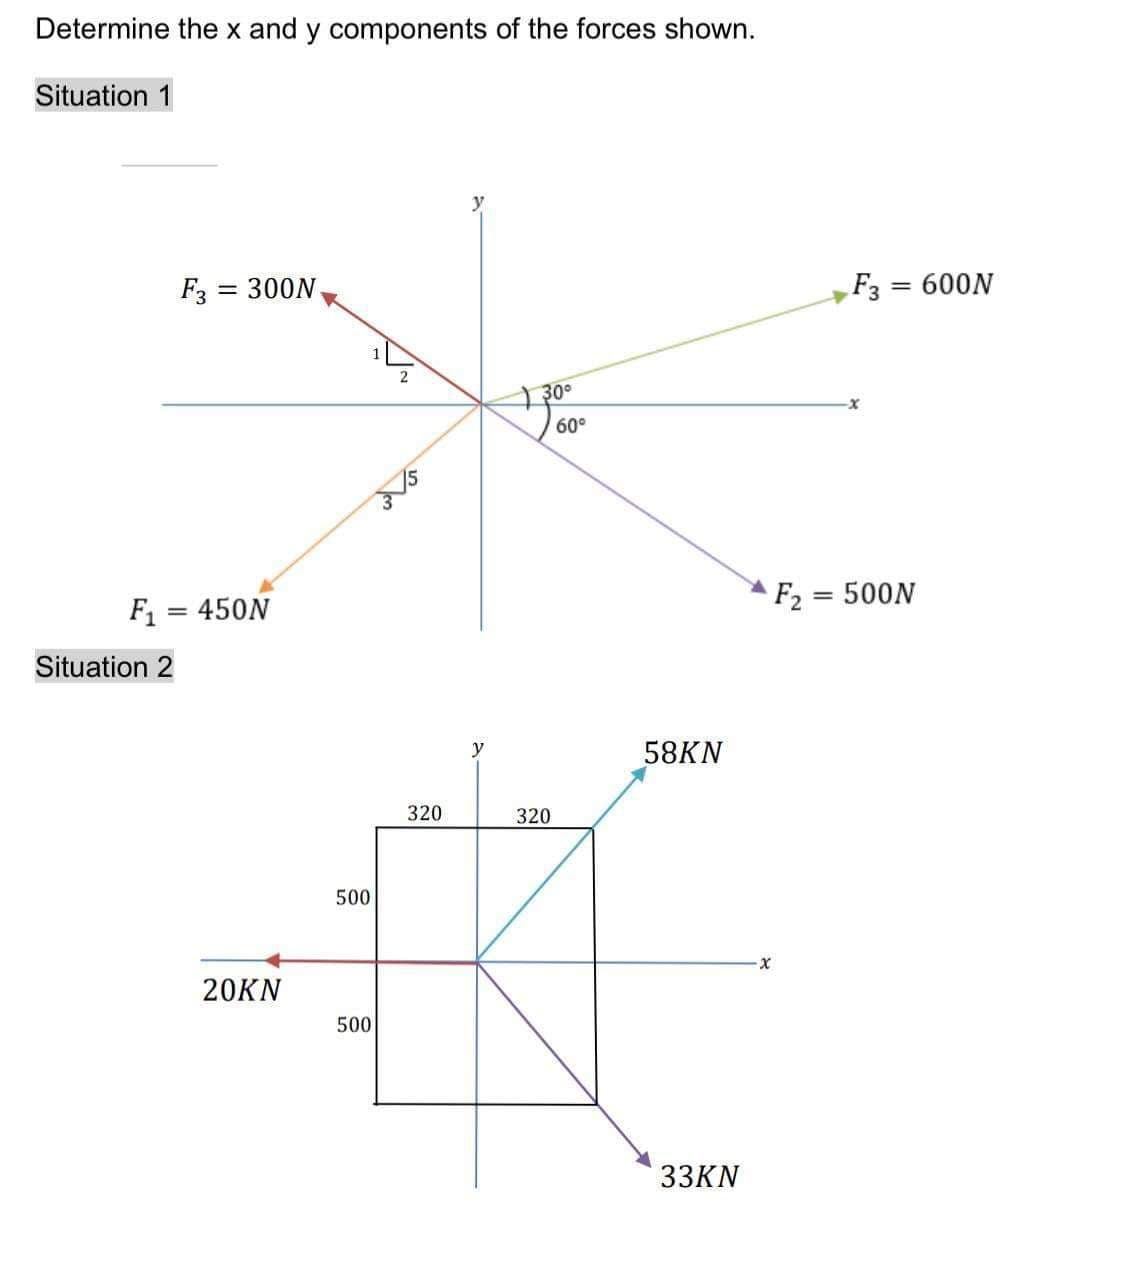 Determine the x and y components of the forces shown.
Situation 1
F3 = 300N
F₁ = 450N
Situation 2
20KN
500
500
2
320
30°
320
60°
58KN
33KN
F3
= 600N
F₂ = 500N